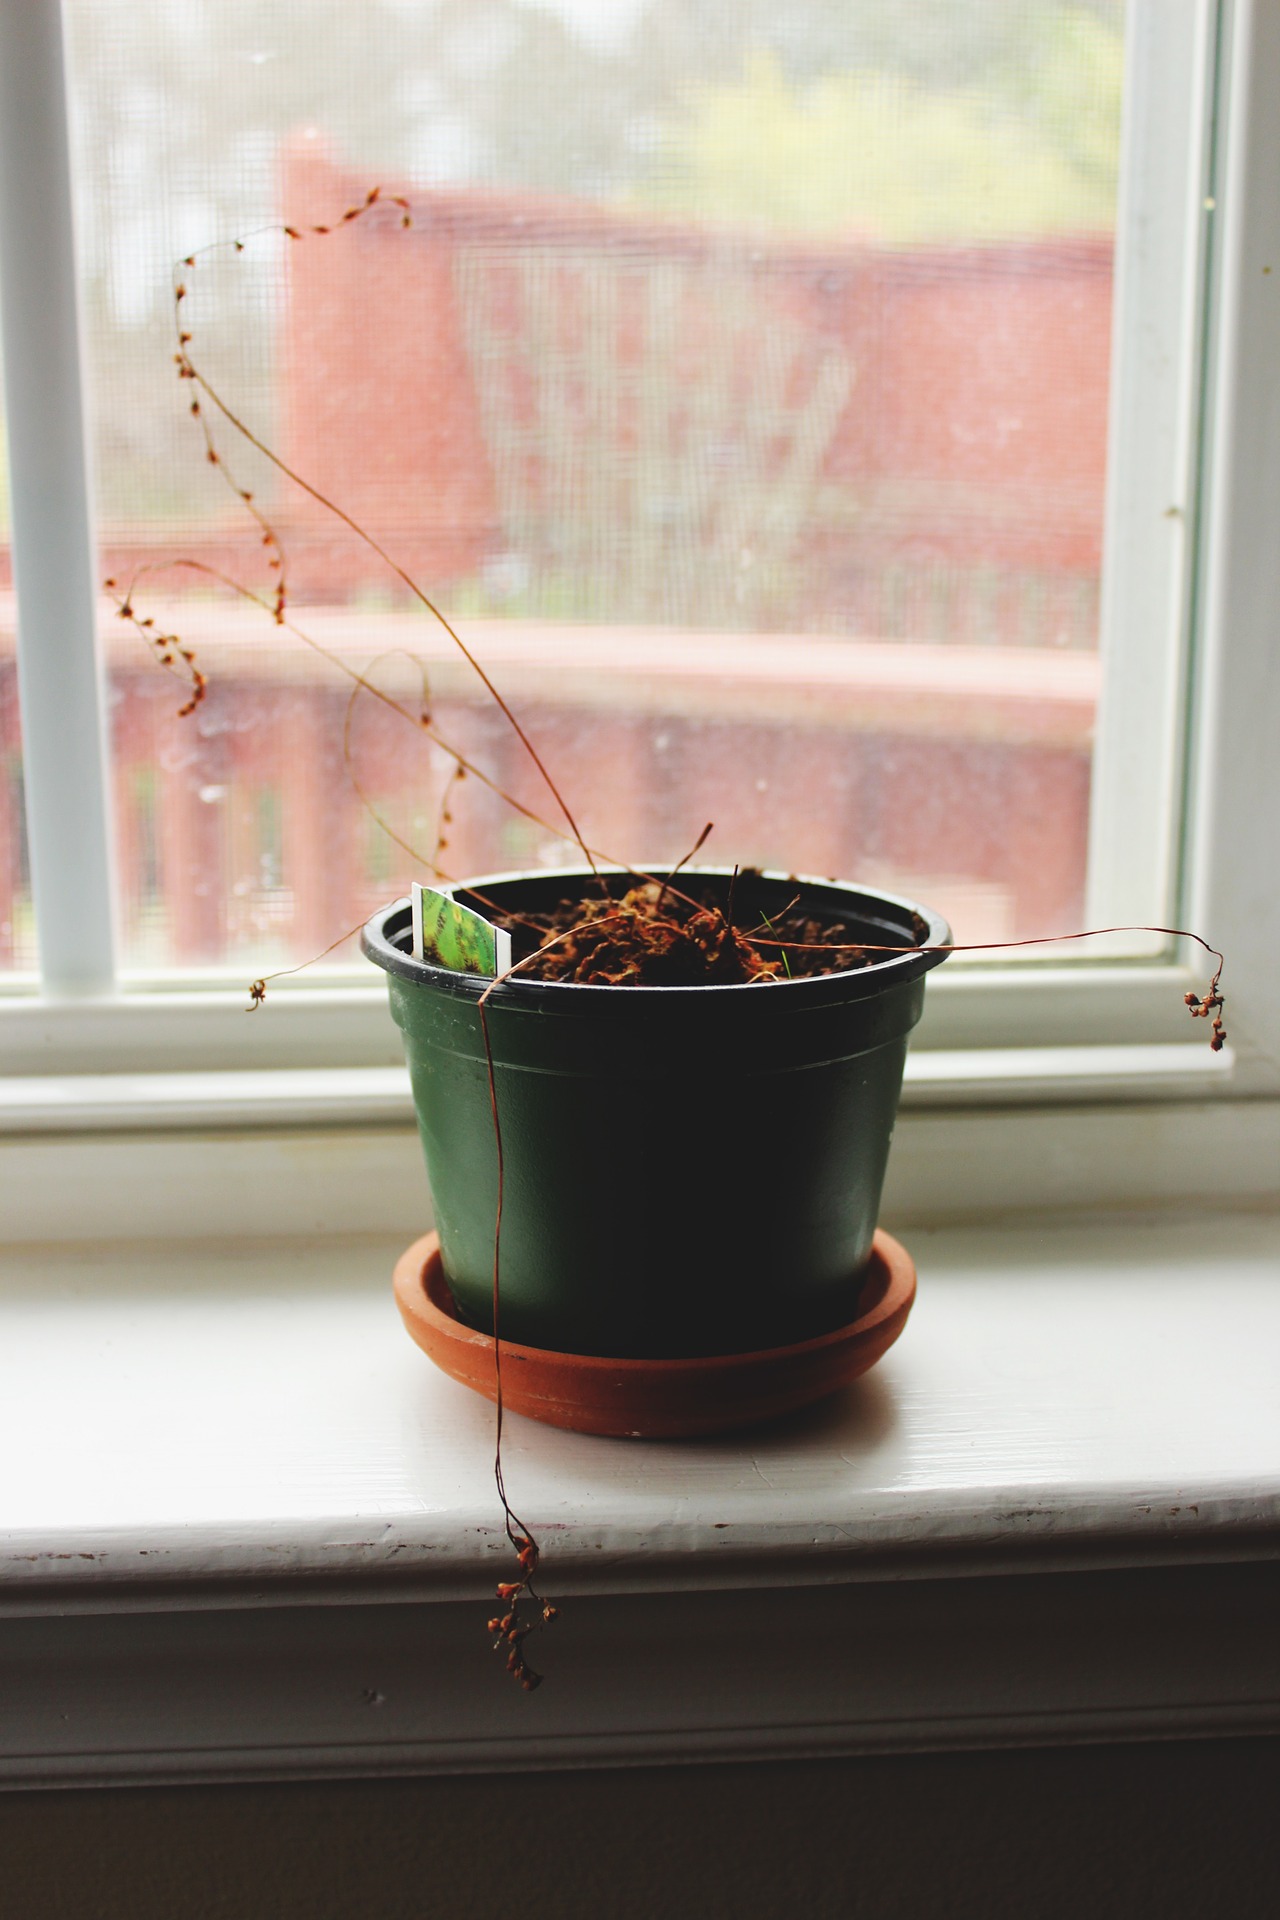 dying houseplant in window sill